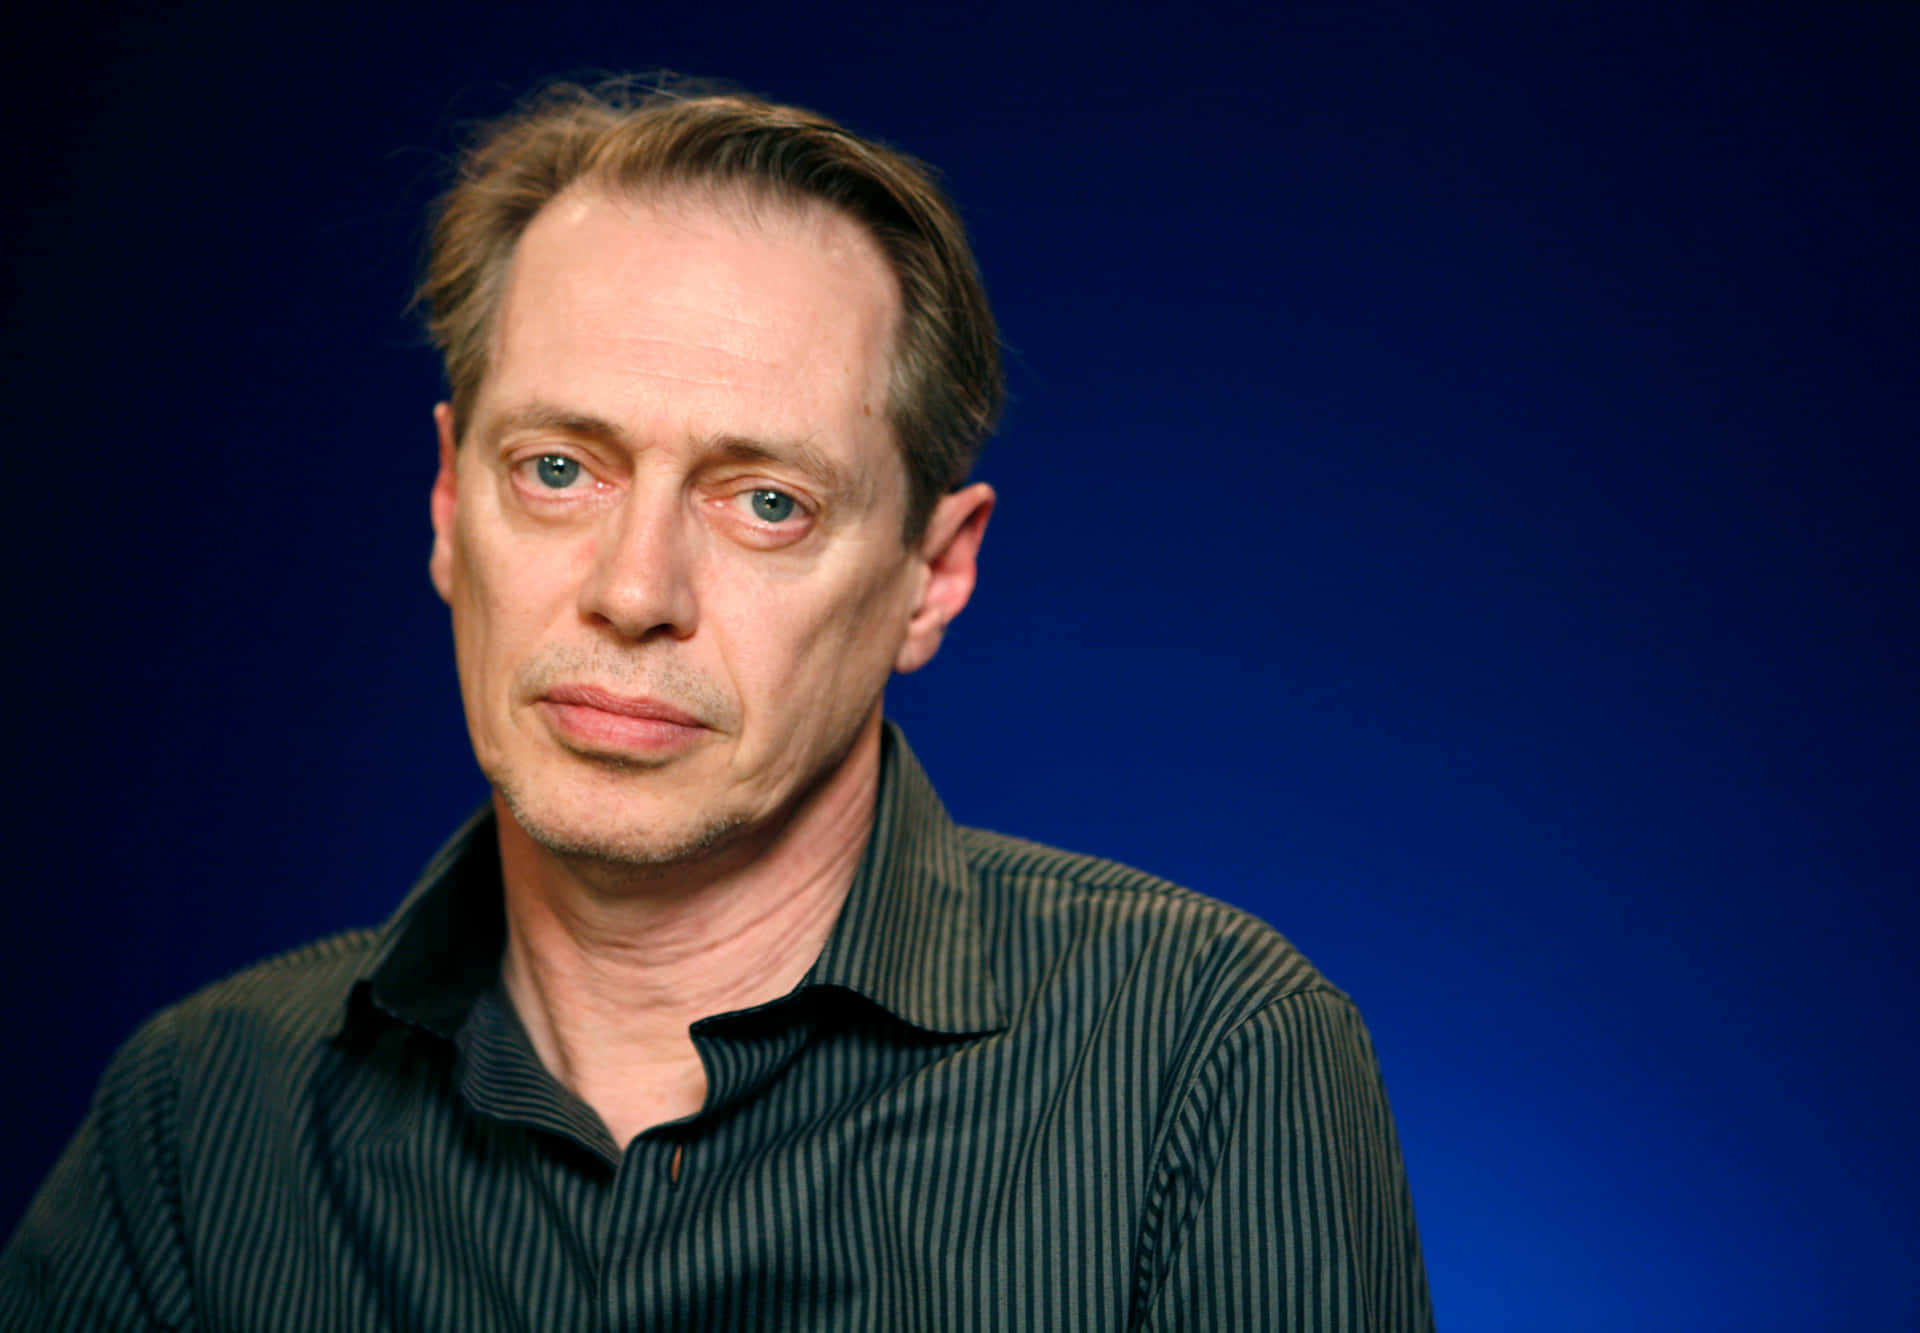 Steve Buscemi In American Filmmaker Guy Ritchie's 1999 Crime Caper 'lock, Stock And Two Smoking Barrels'